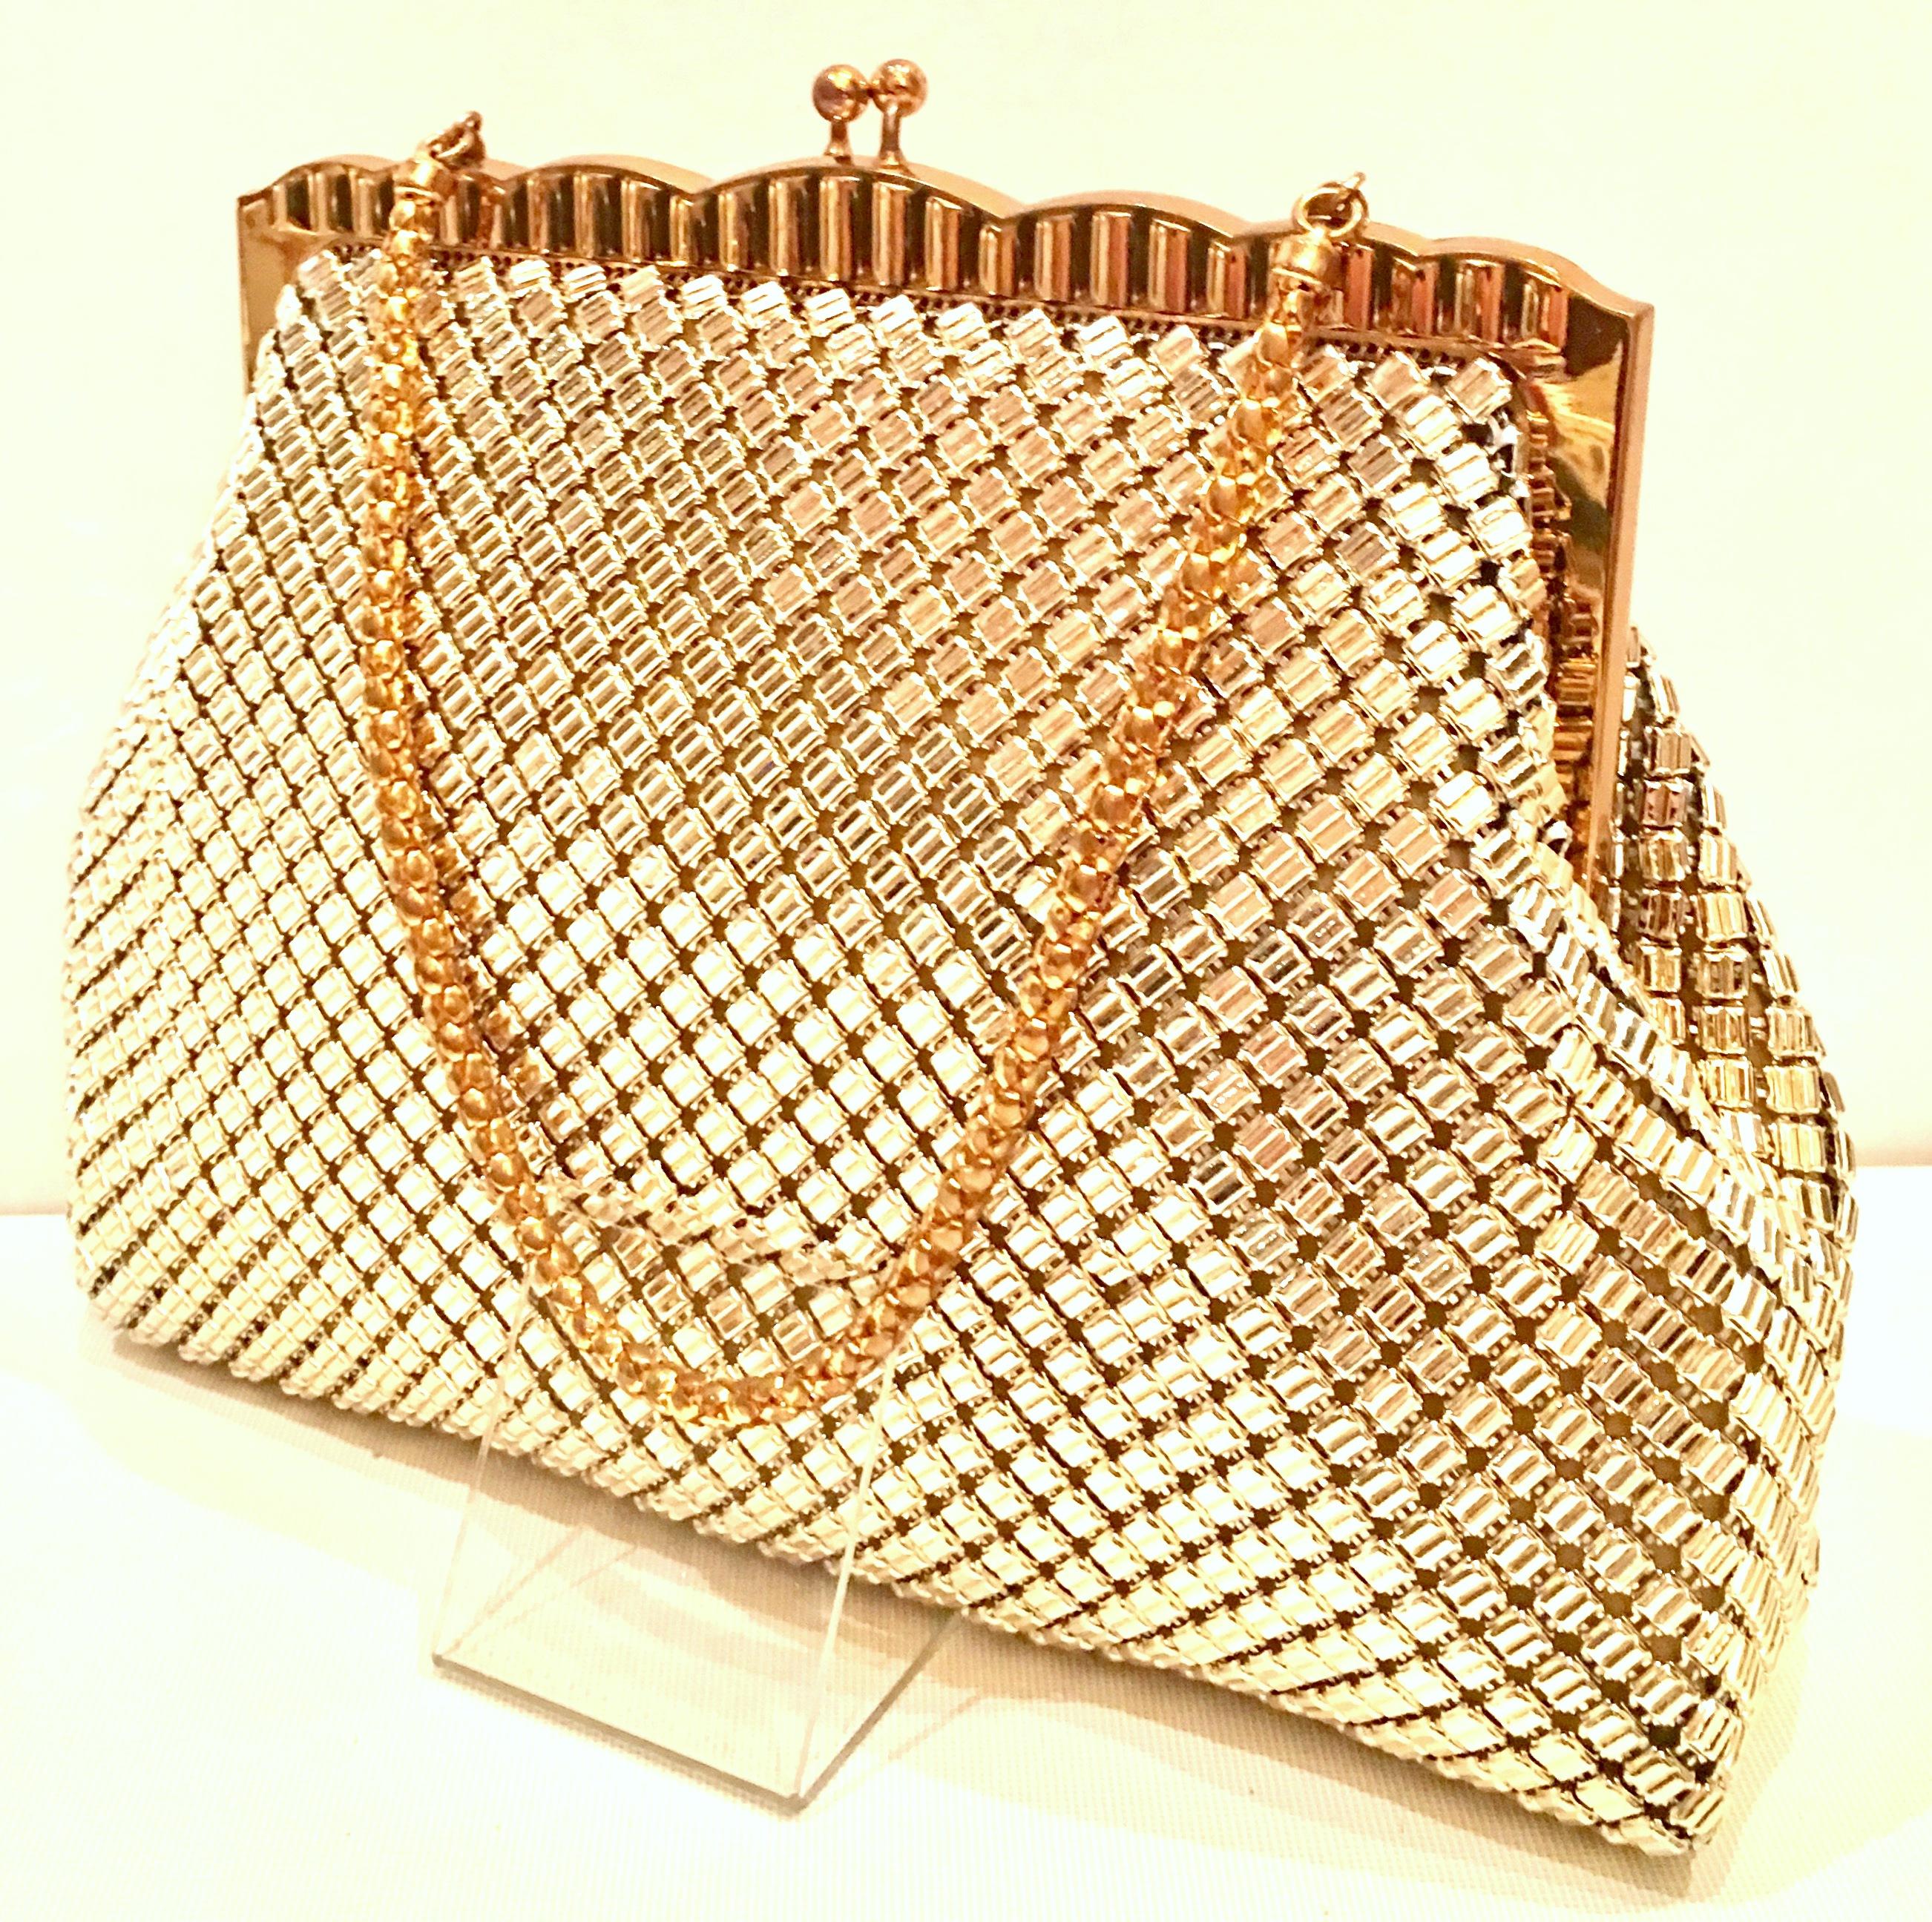 Vintage Whiting & Davis Gold Metal Mesh Handbag. This older, unique and pristine metal mesh handbag features a gilt gold metal frame with a soft metal mesh body and gilt gold rope style shoulder carrying strap. The interior pristine, has one storage